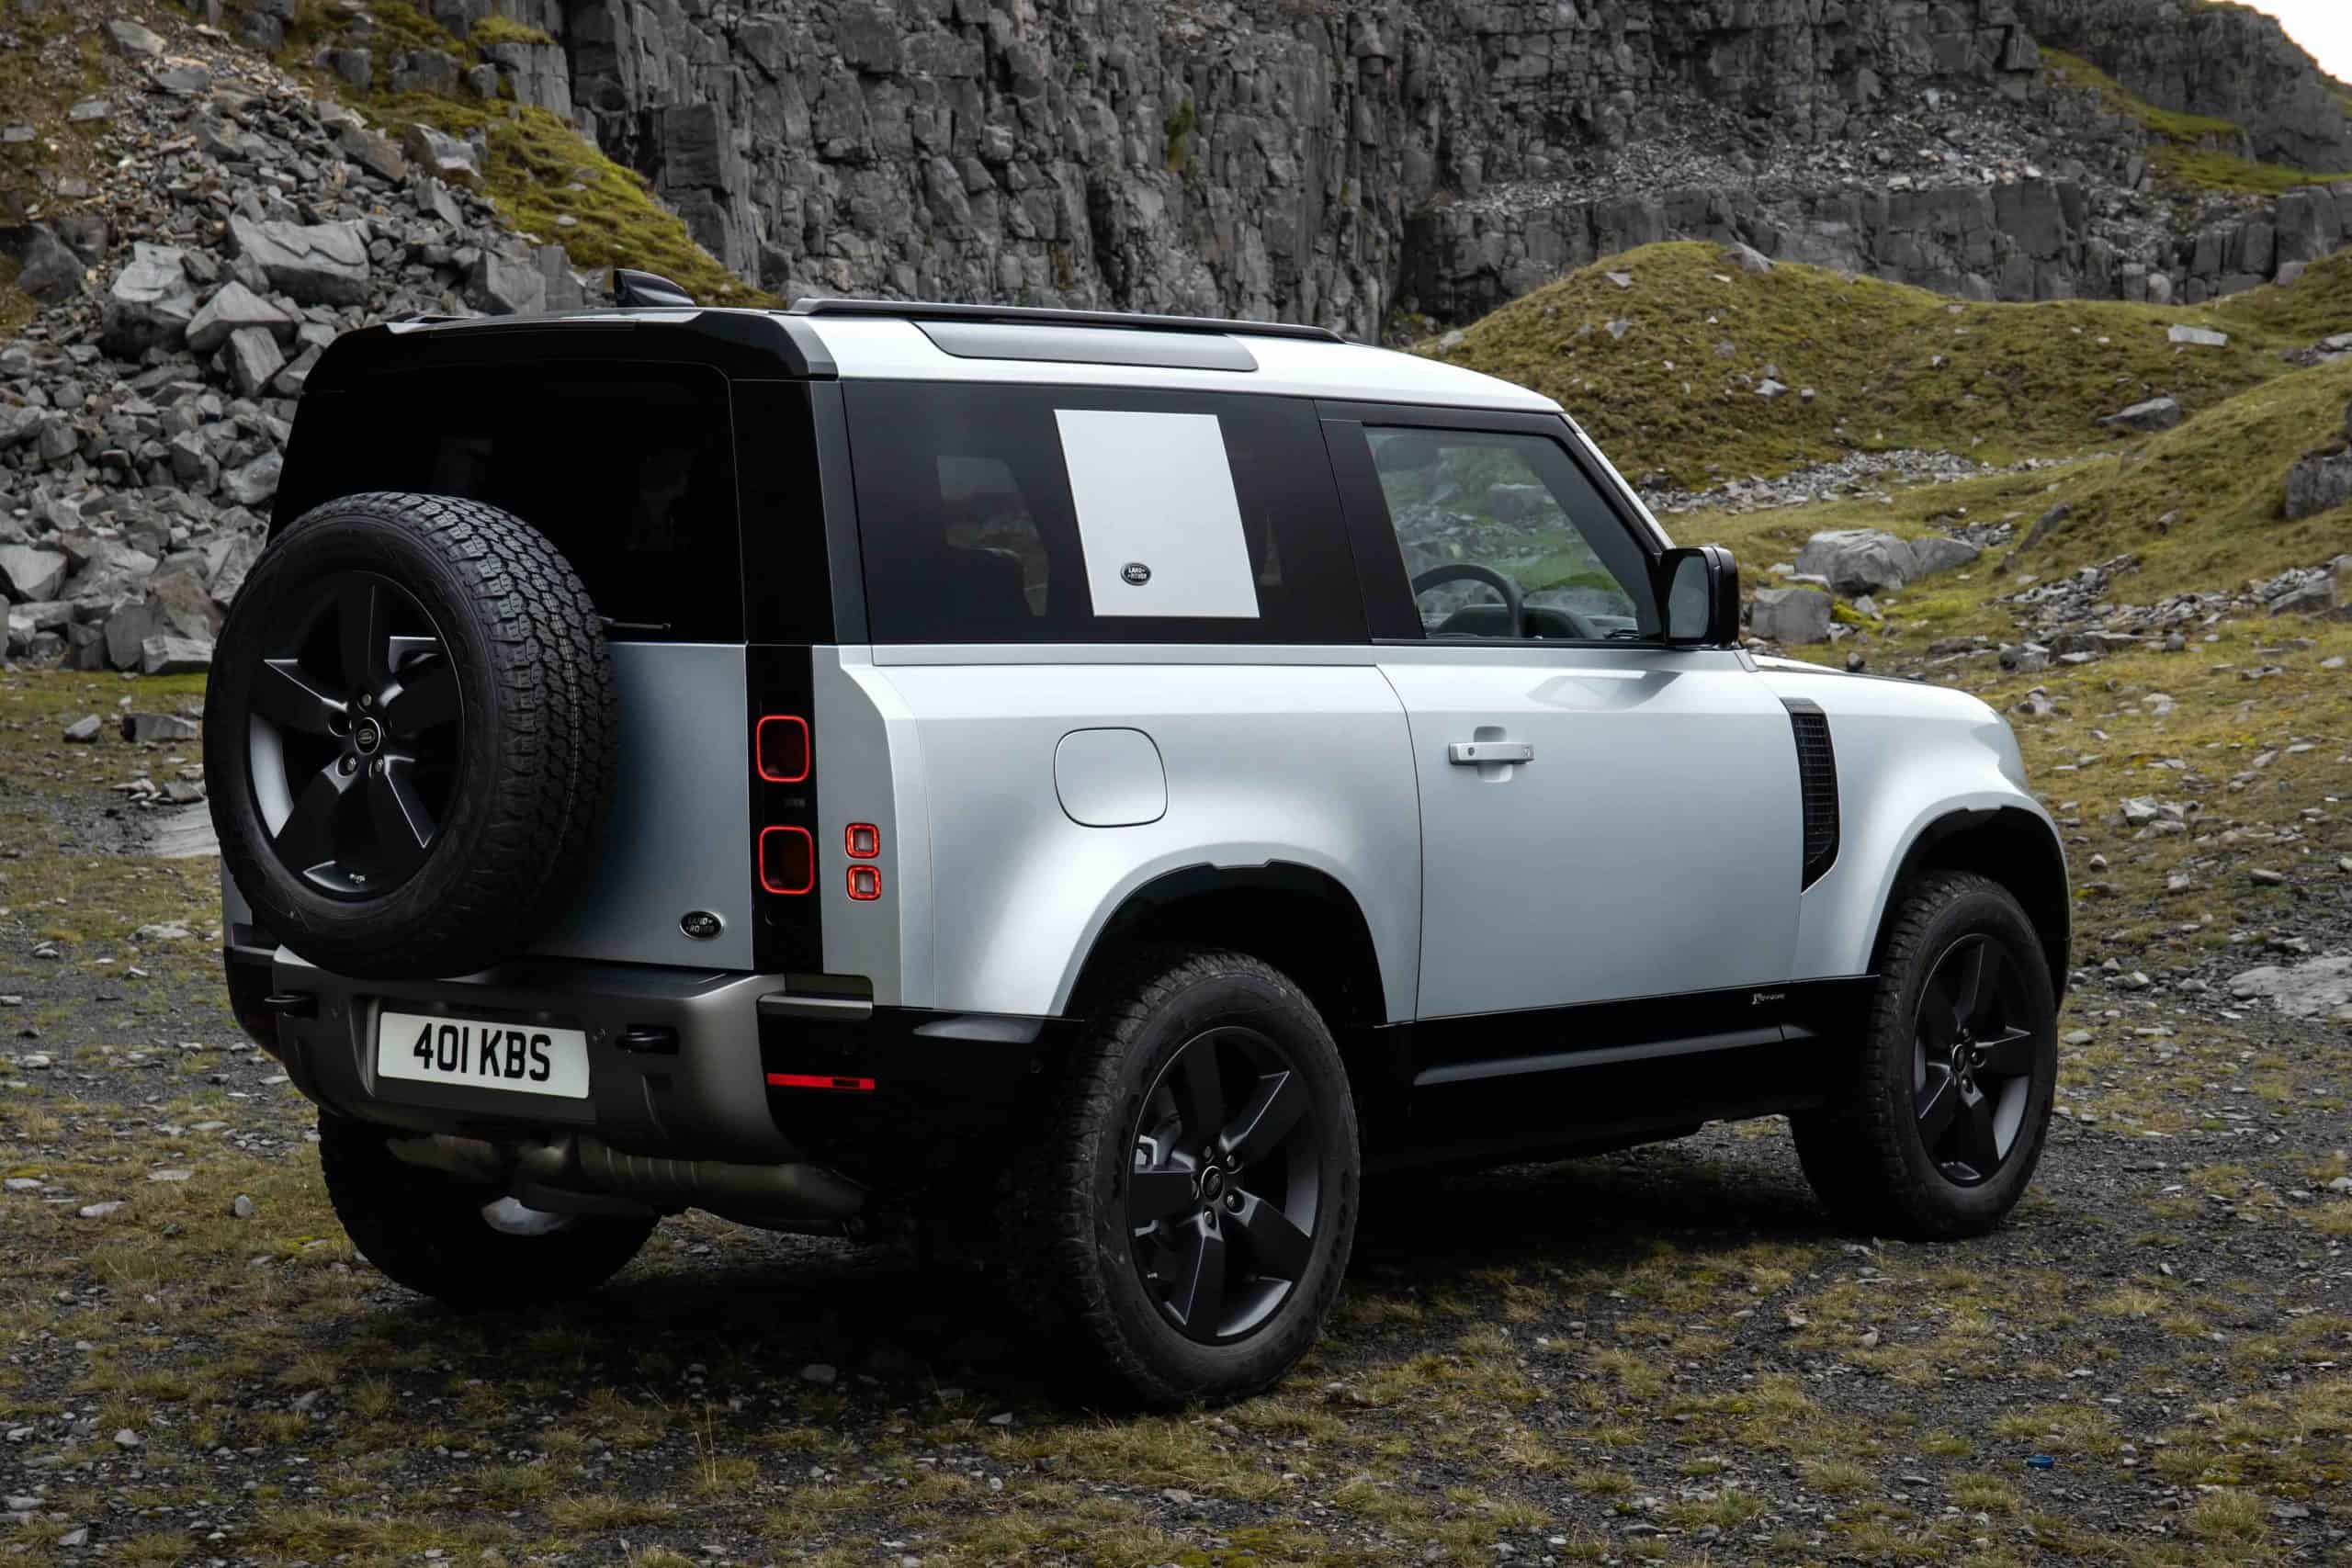 2021 Land Rover Defender 90 Pricing And Pictures | Autowise